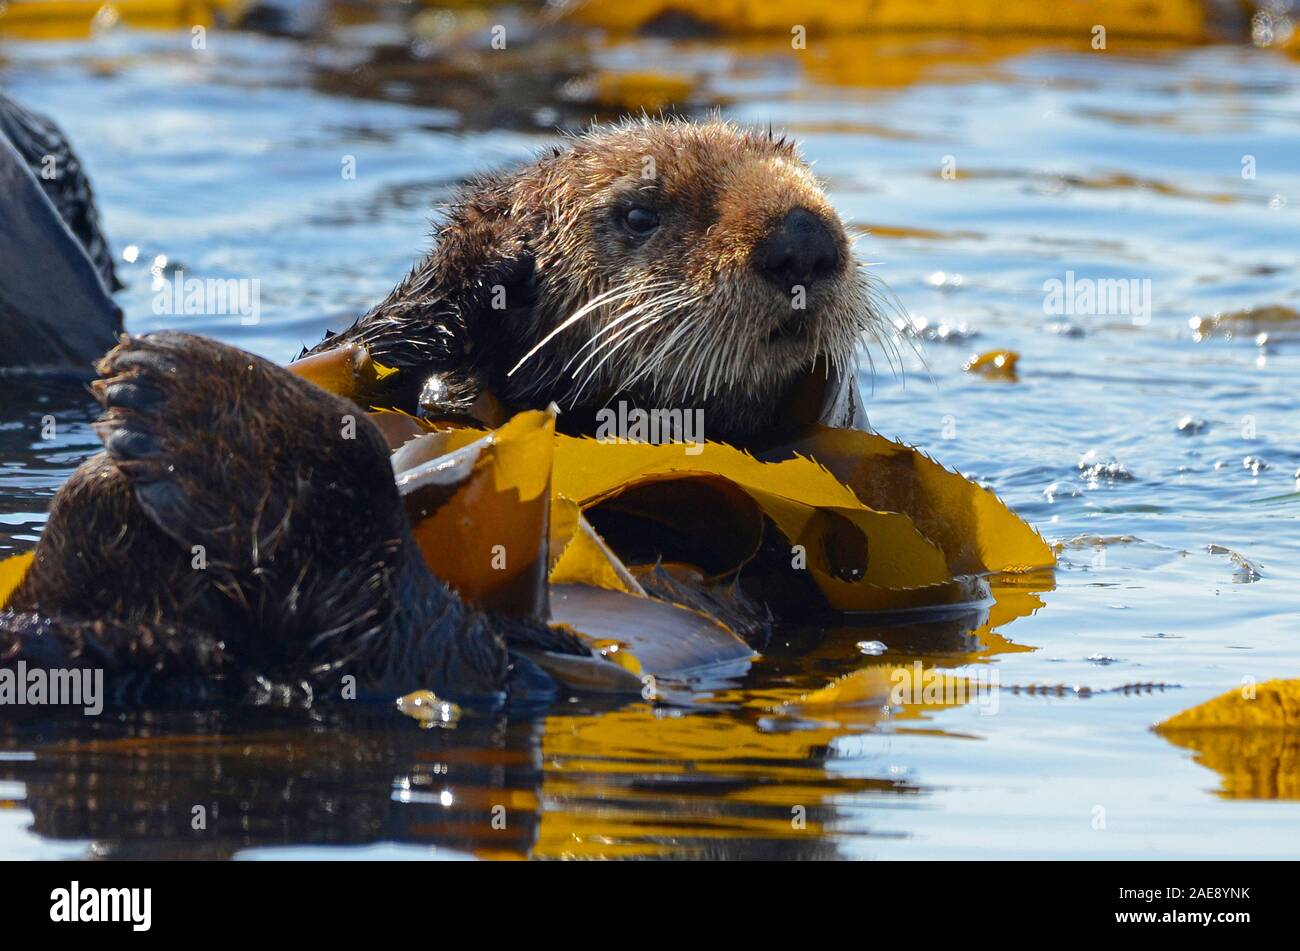 California sea otter, Enhydra lutris, Morro Bay, California. Sea otters wrap themselves in kelp to avoid drifting from their companions. This allows t Stock Photo